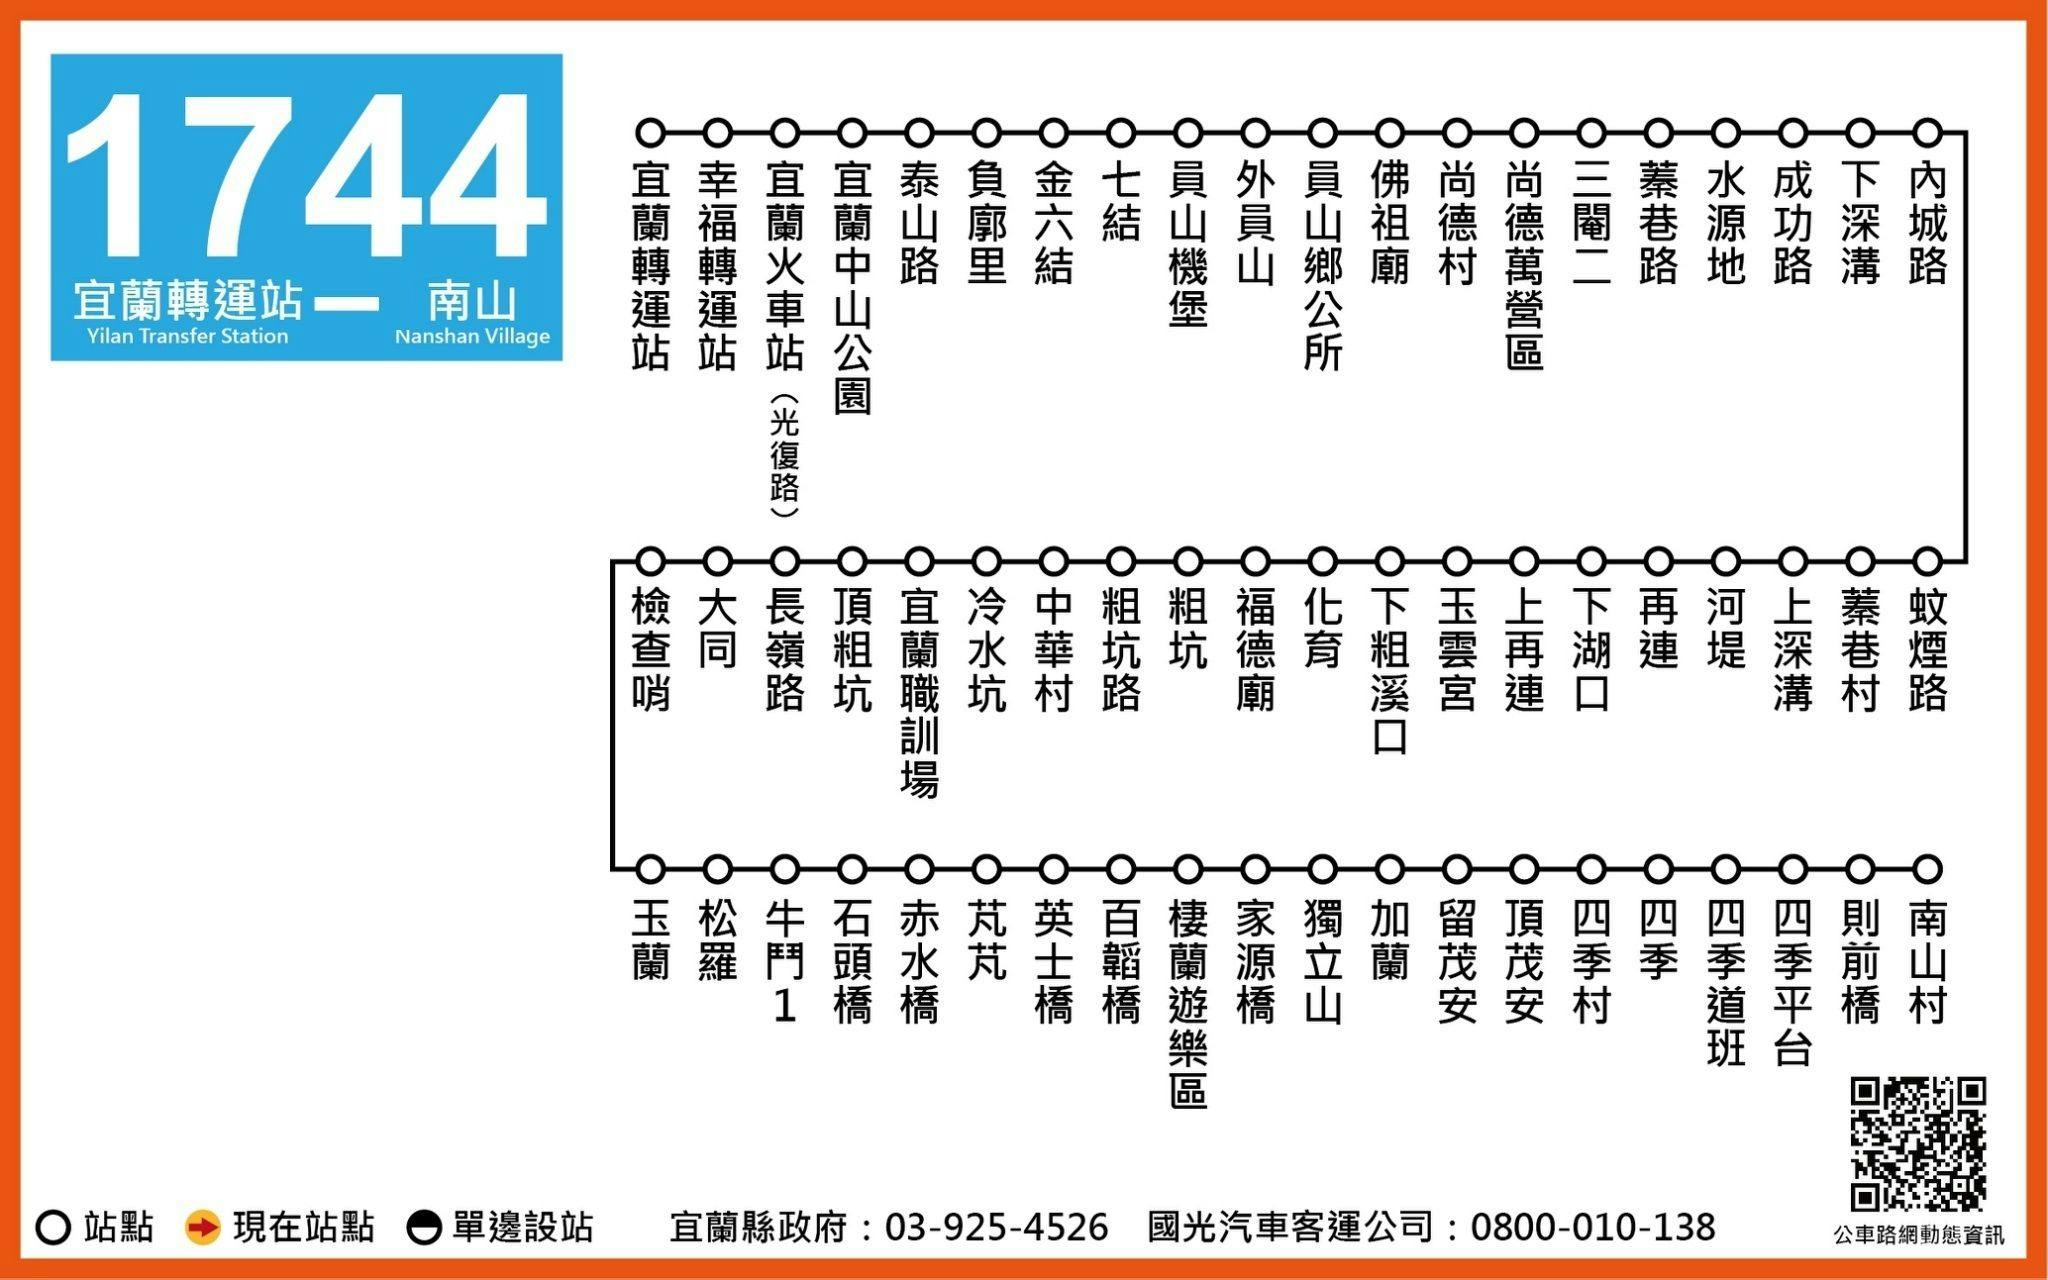 1744Route Map-宜蘭 Bus